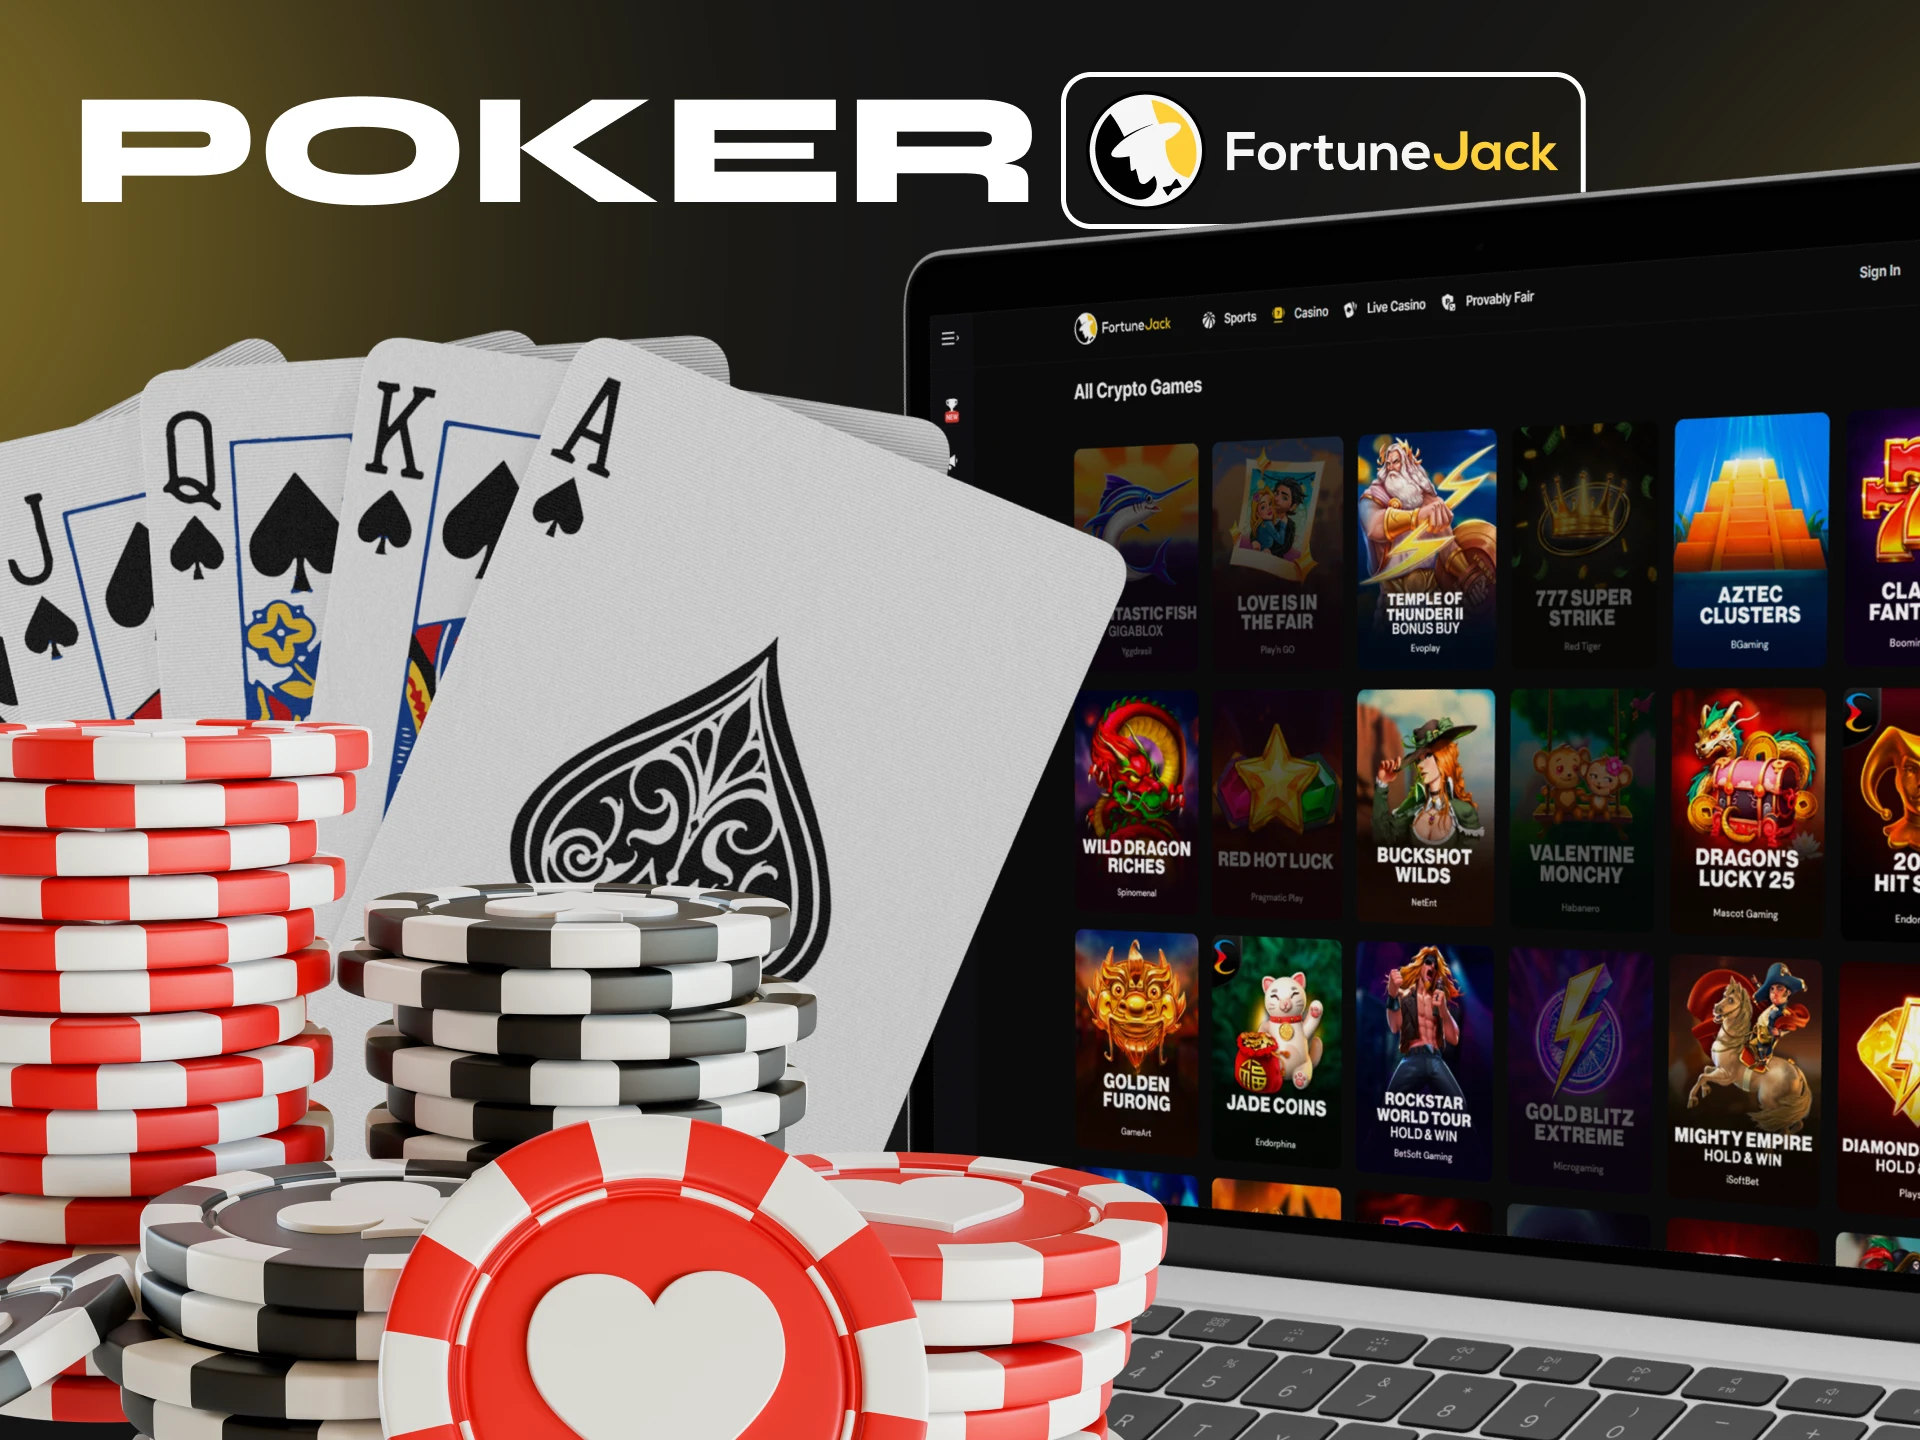 FortuneJack Casino offers a wide variety of poker games.